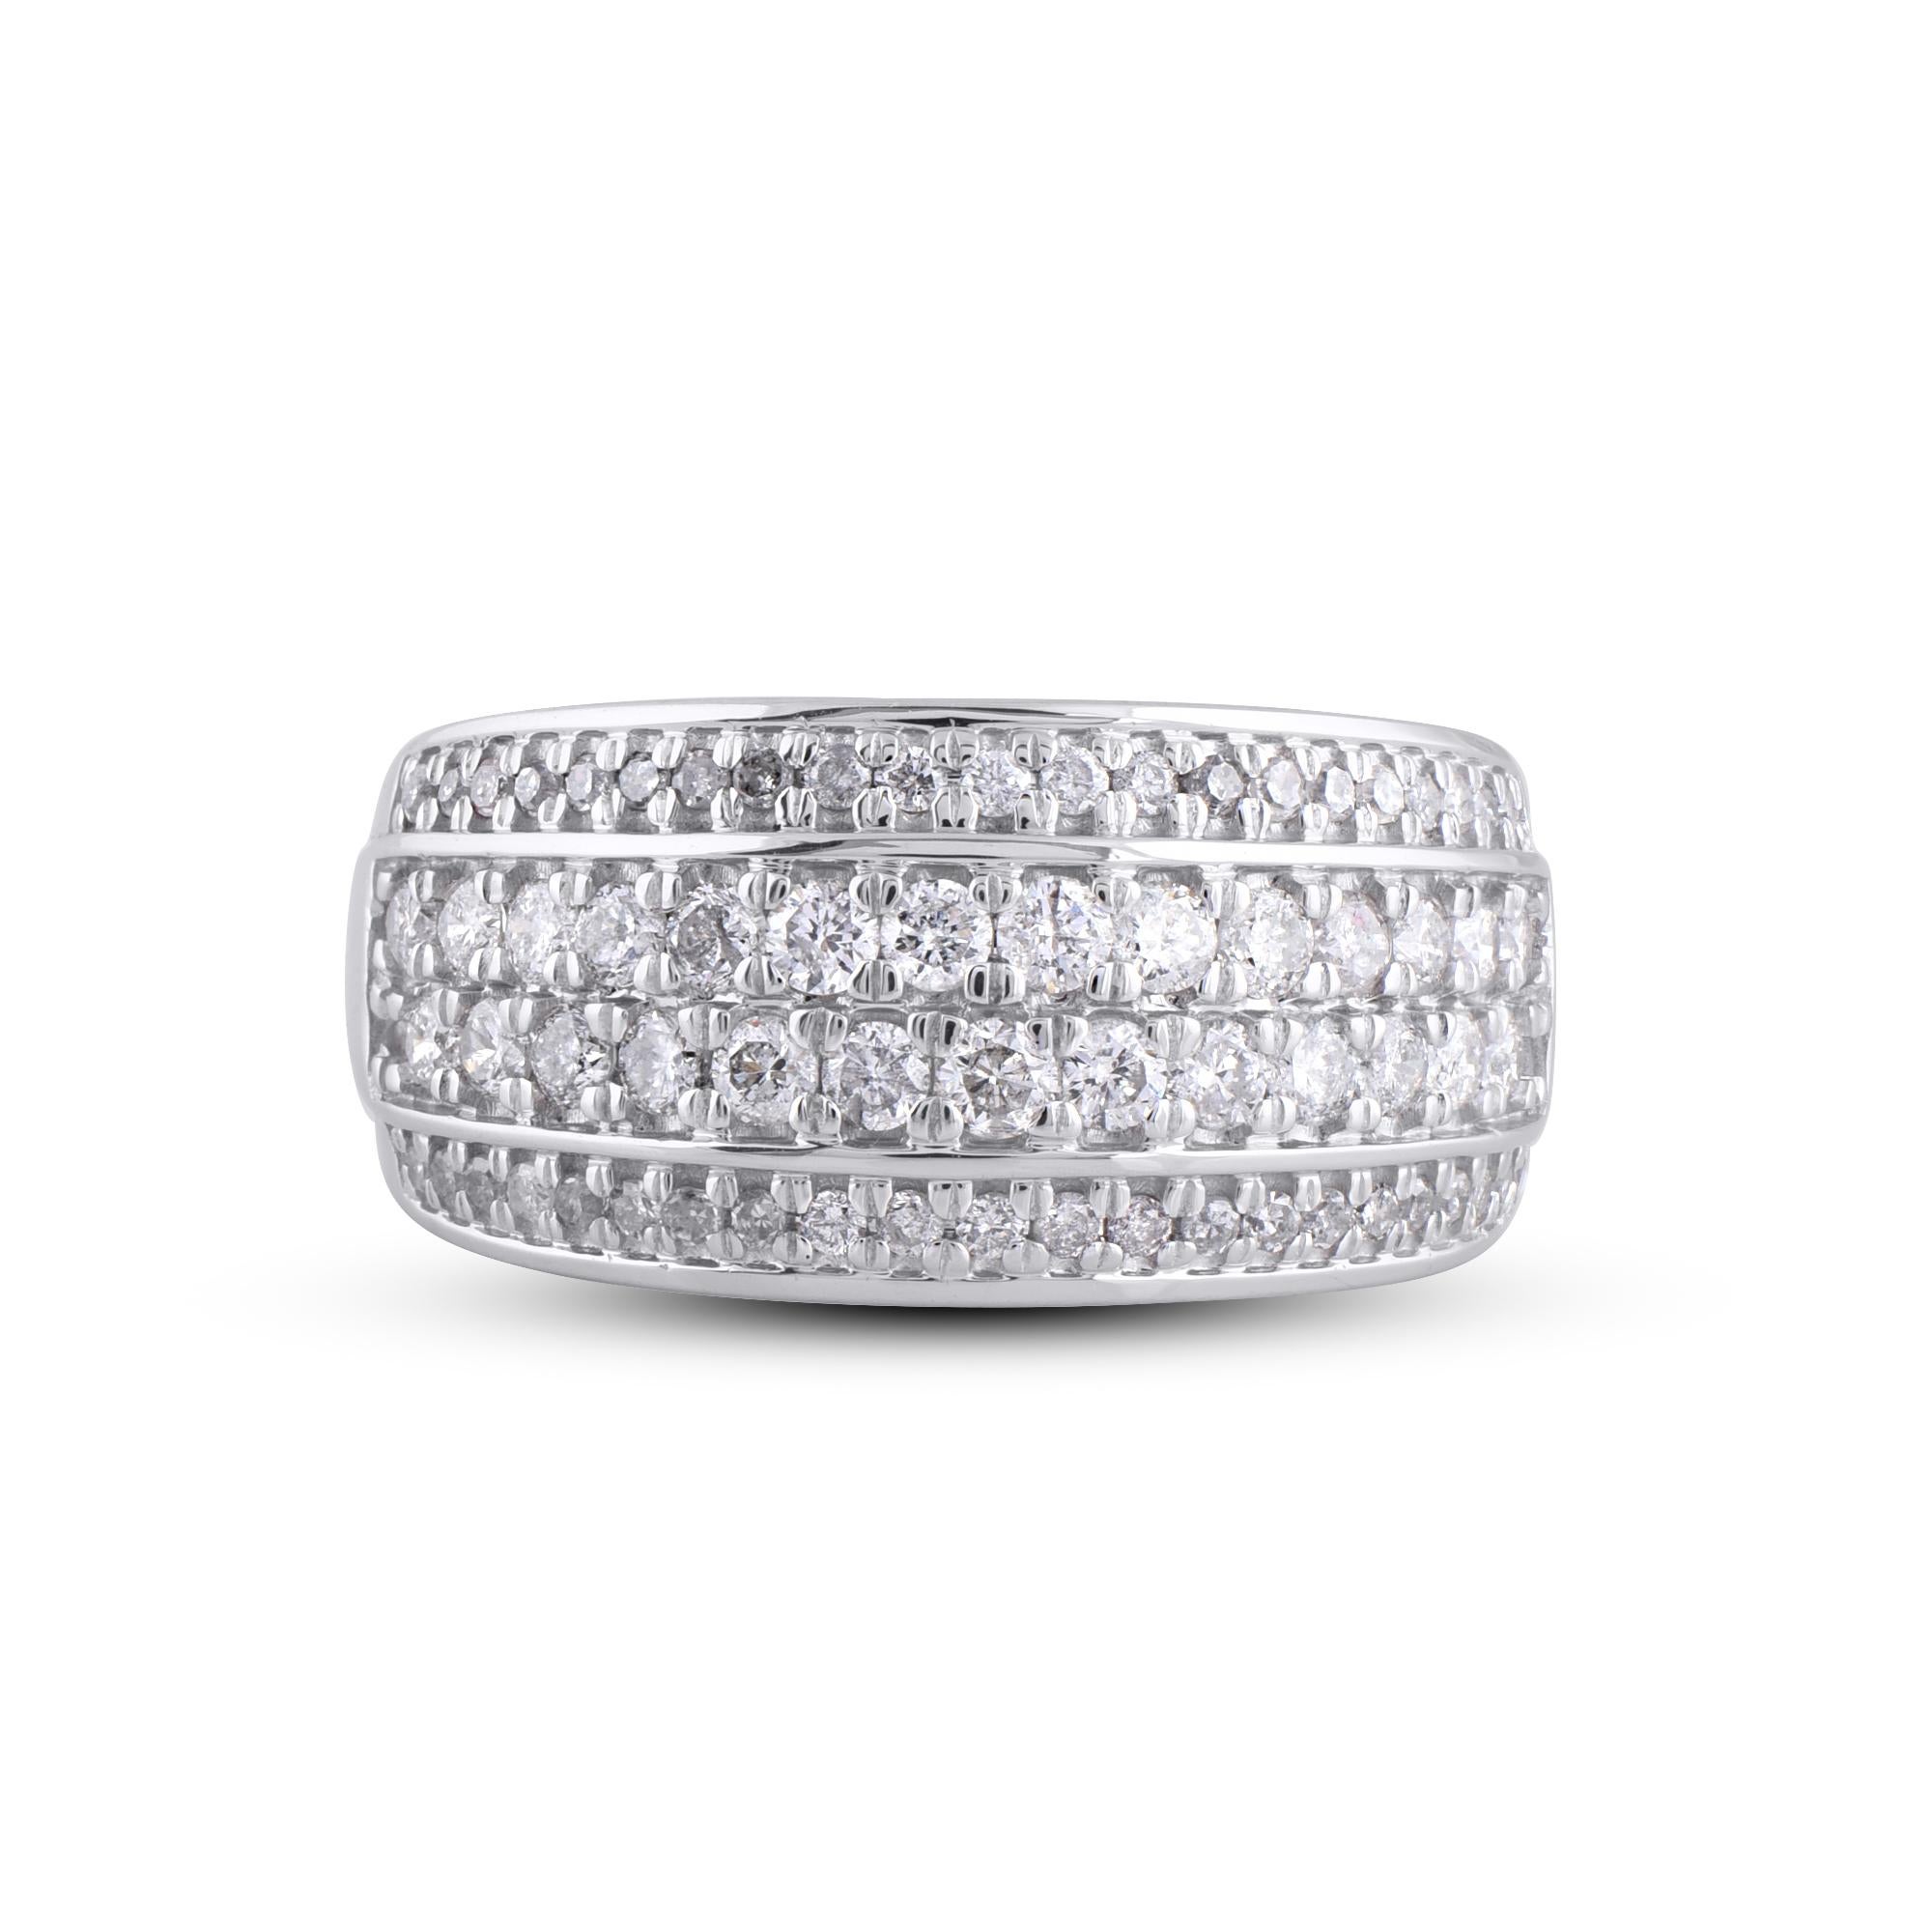 Truly exquisite, this multi row band diamond ring is sure to be admired for the inherent classic beauty and elegance within its design. This band ring features a sparkling 77 brilliant cut and single cut round diamonds beautifully set in pave